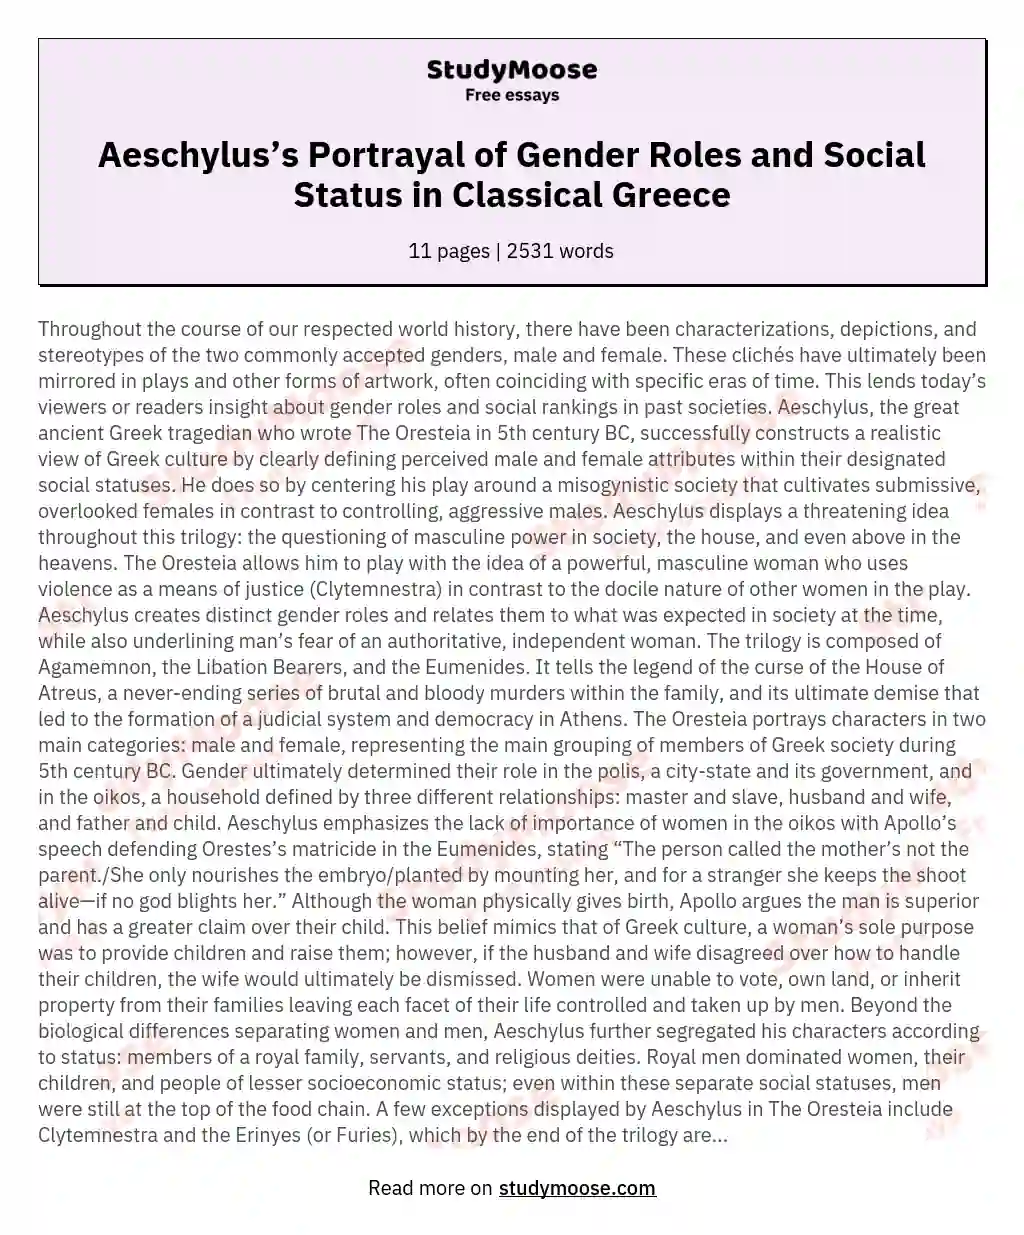 Aeschylus’s Portrayal of Gender Roles and Social Status in Classical Greece essay